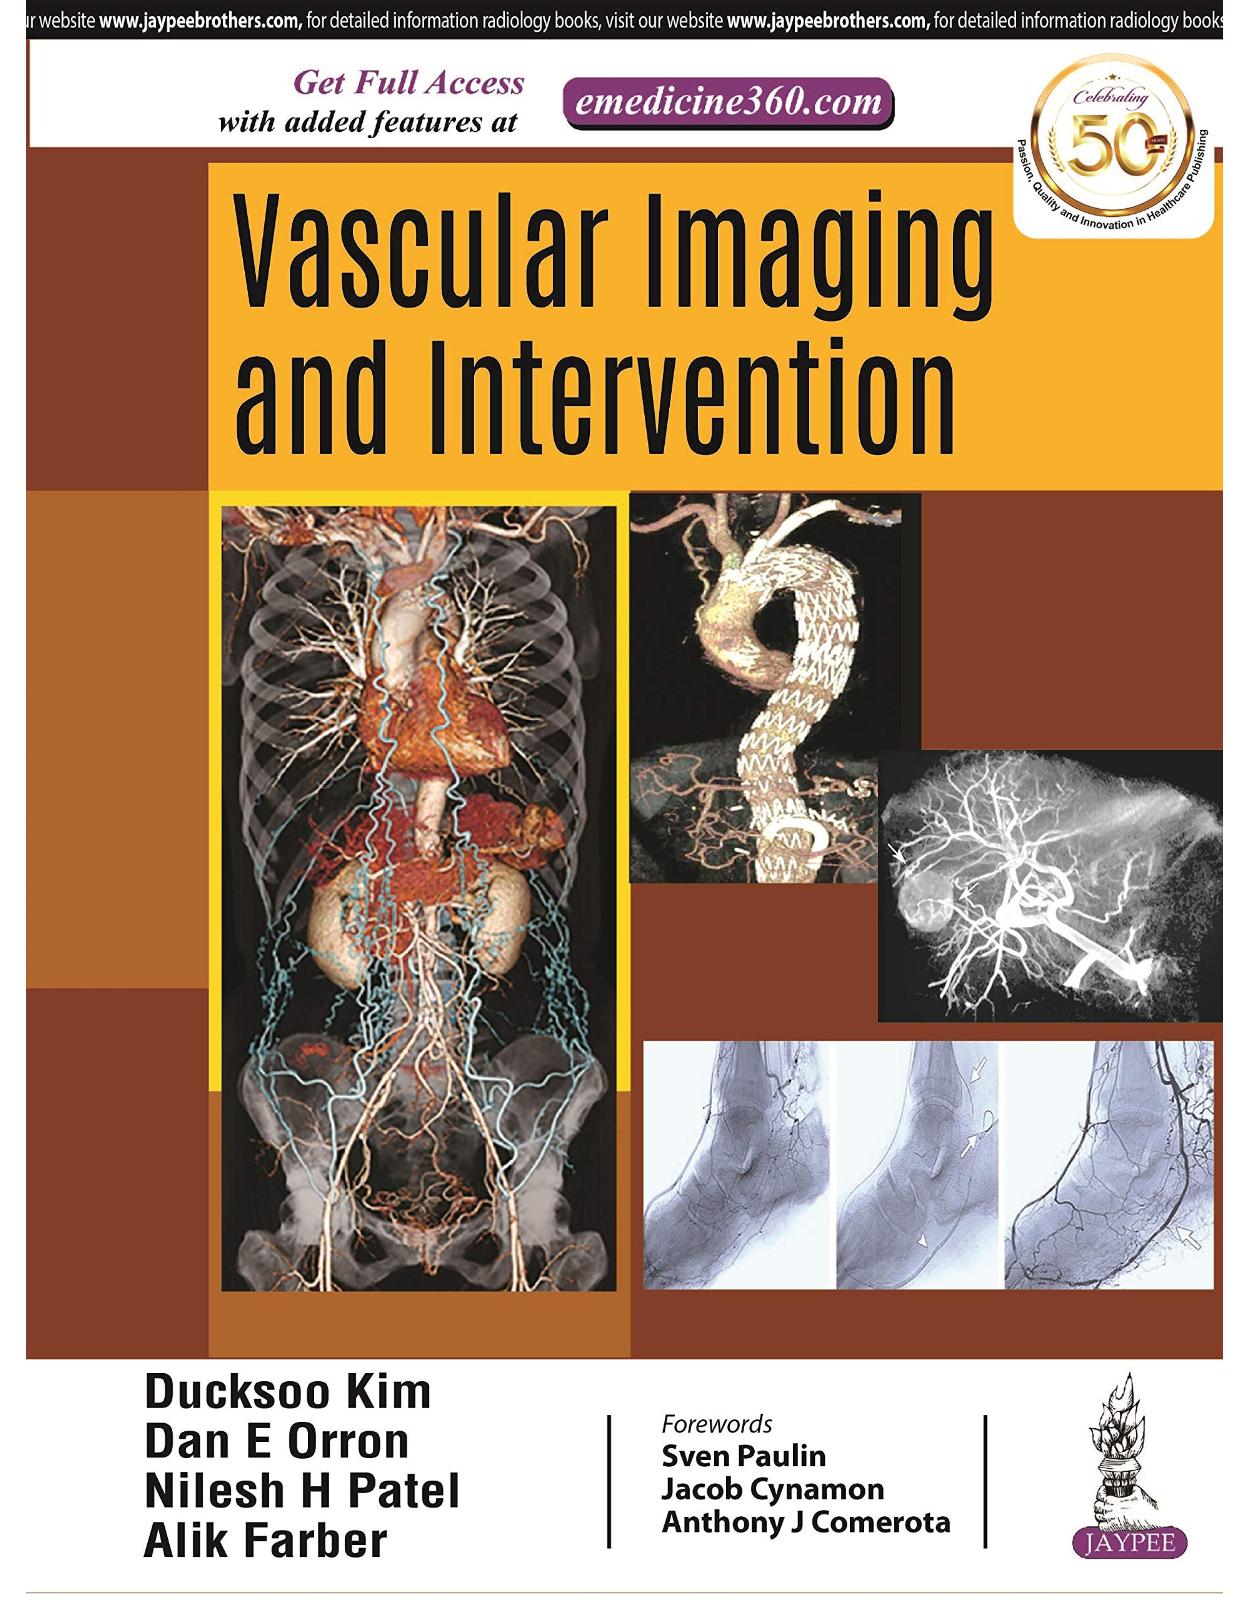 Vascular Imaging and Intervention